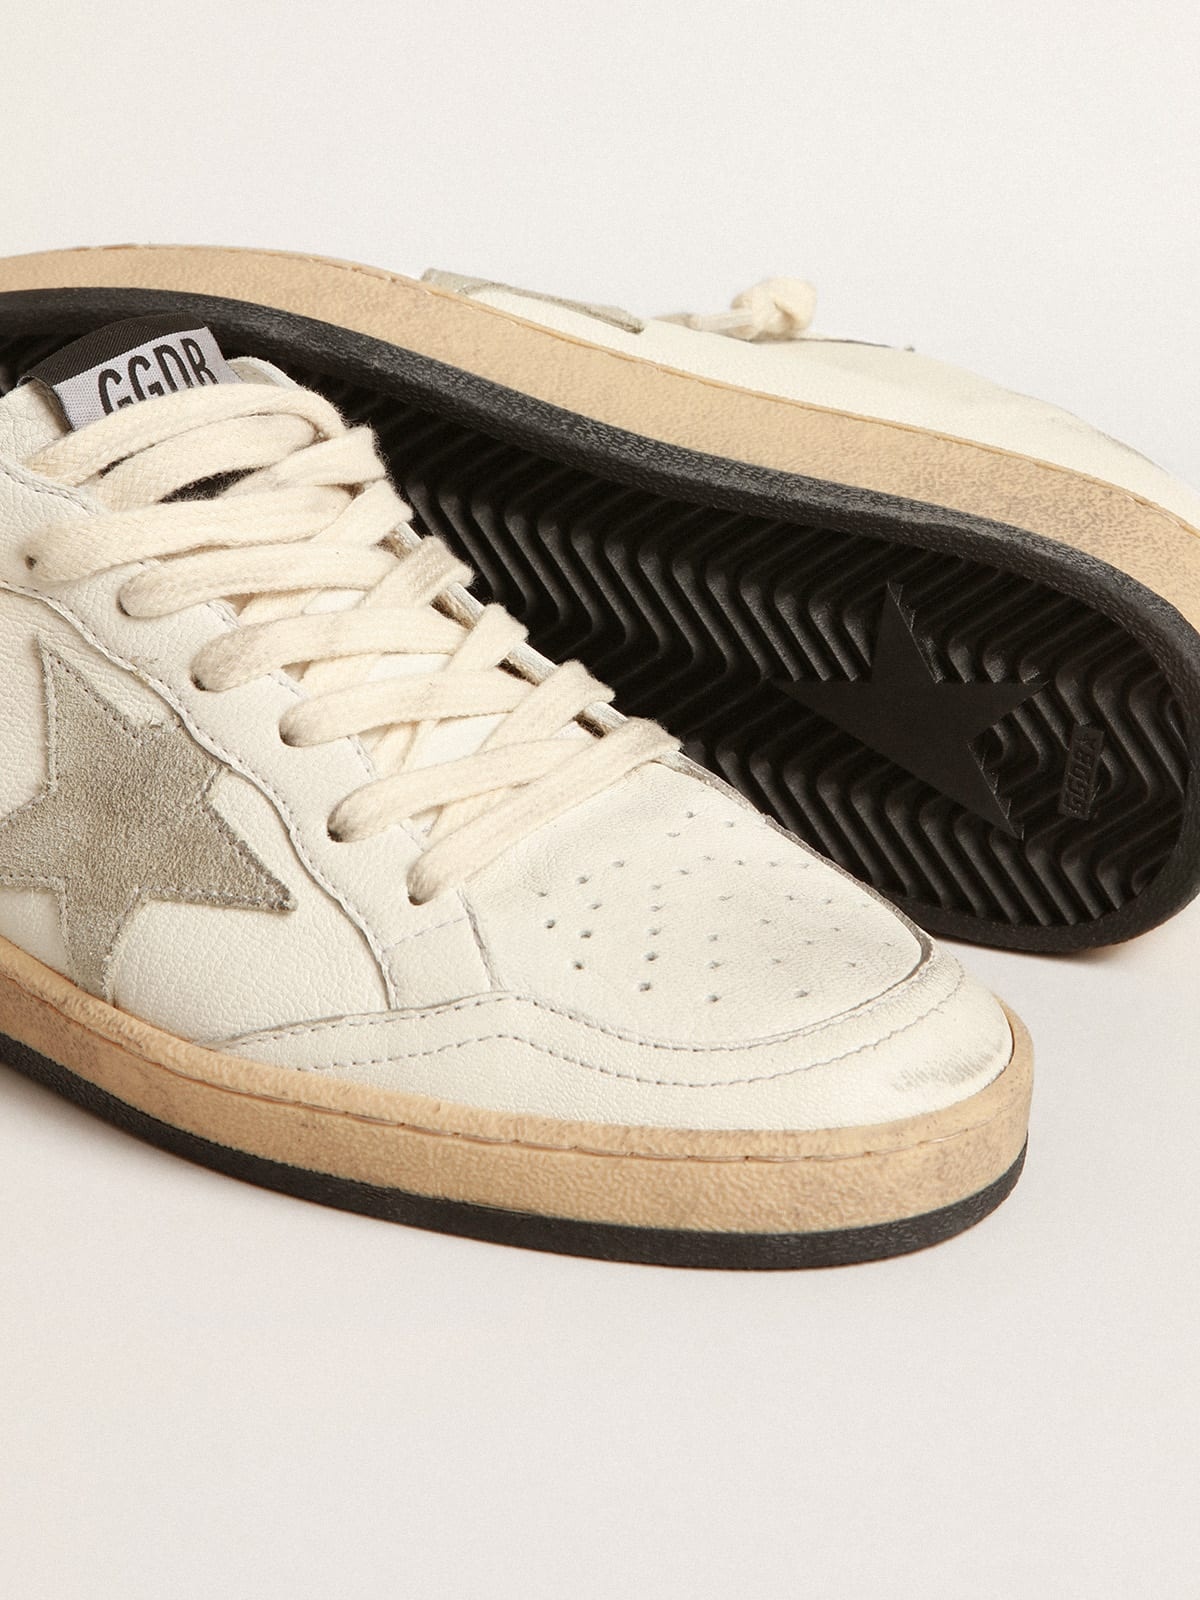 Ball Star Sabots in nappa leather with ice-gray suede star - 4